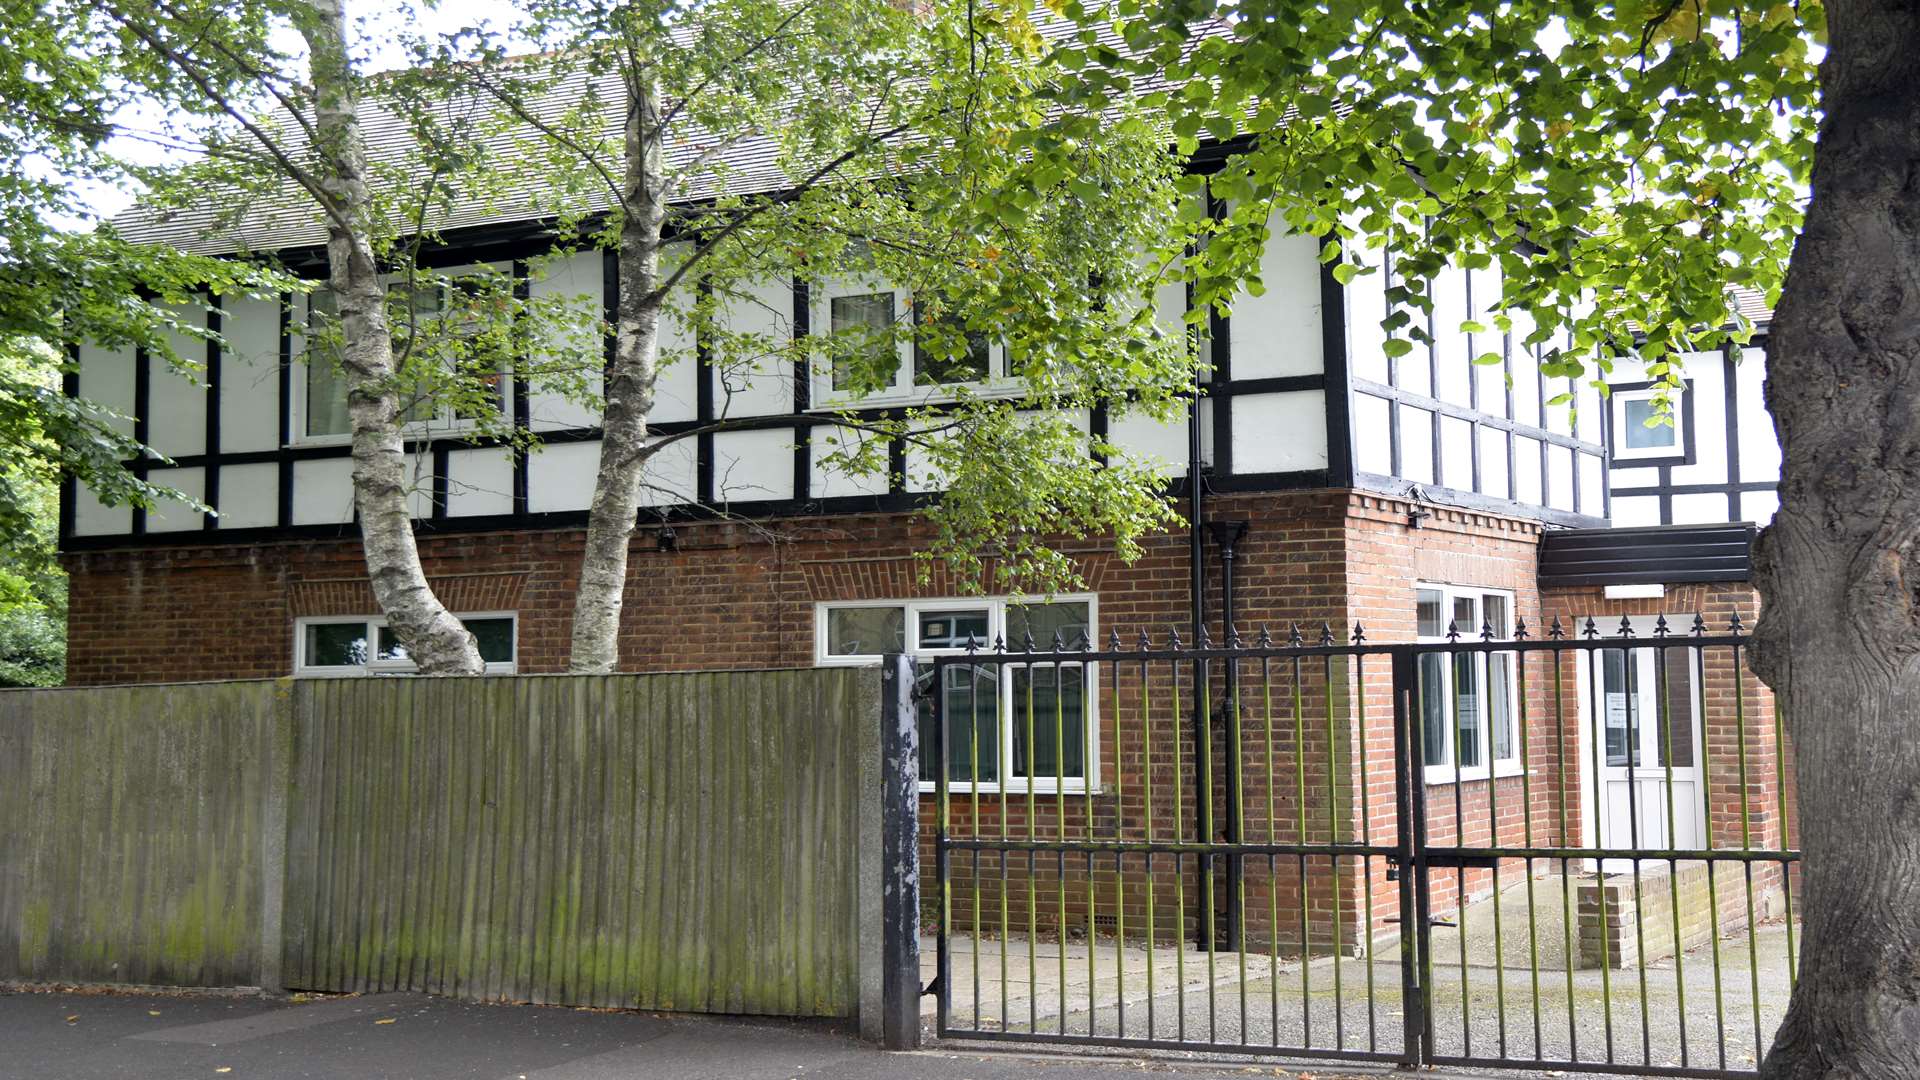 Therapeutic House in Gillingham is under threat of closure